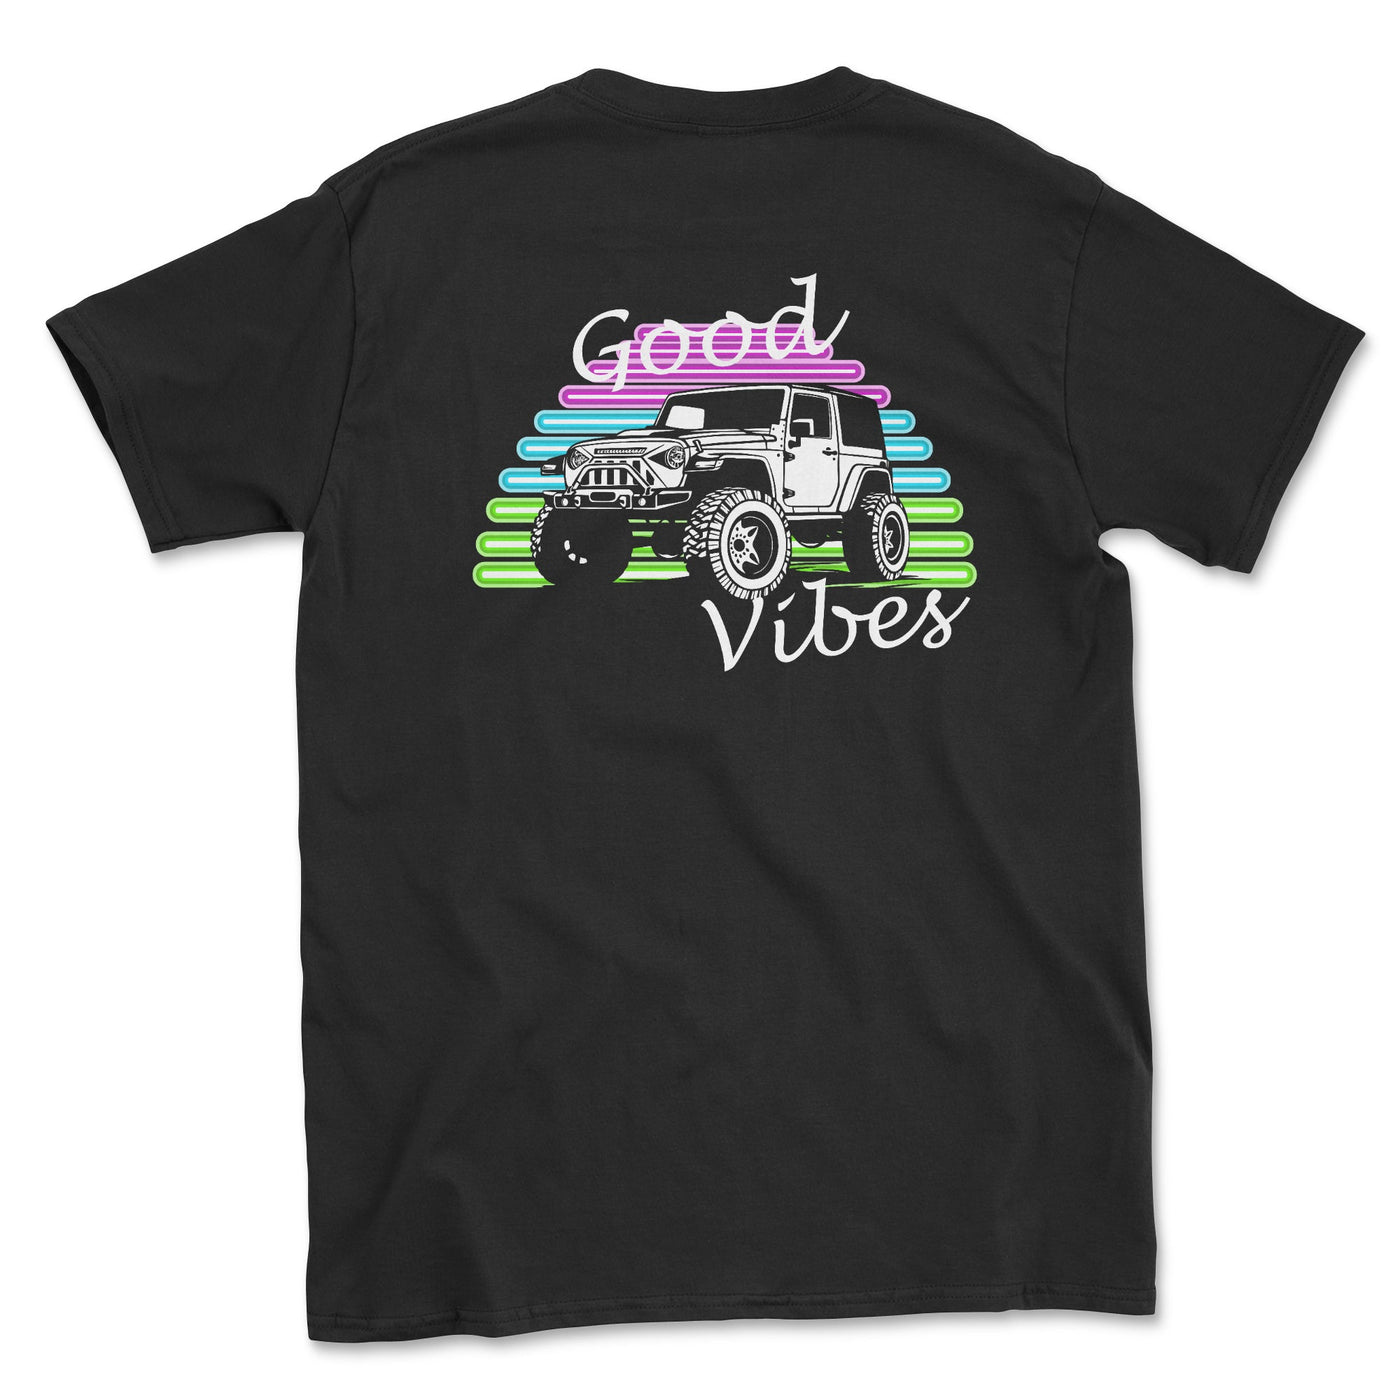 Good Vibes Offroad 4x4 Graphic Tee Shirt - Goats Trail Off-Road Apparel Company